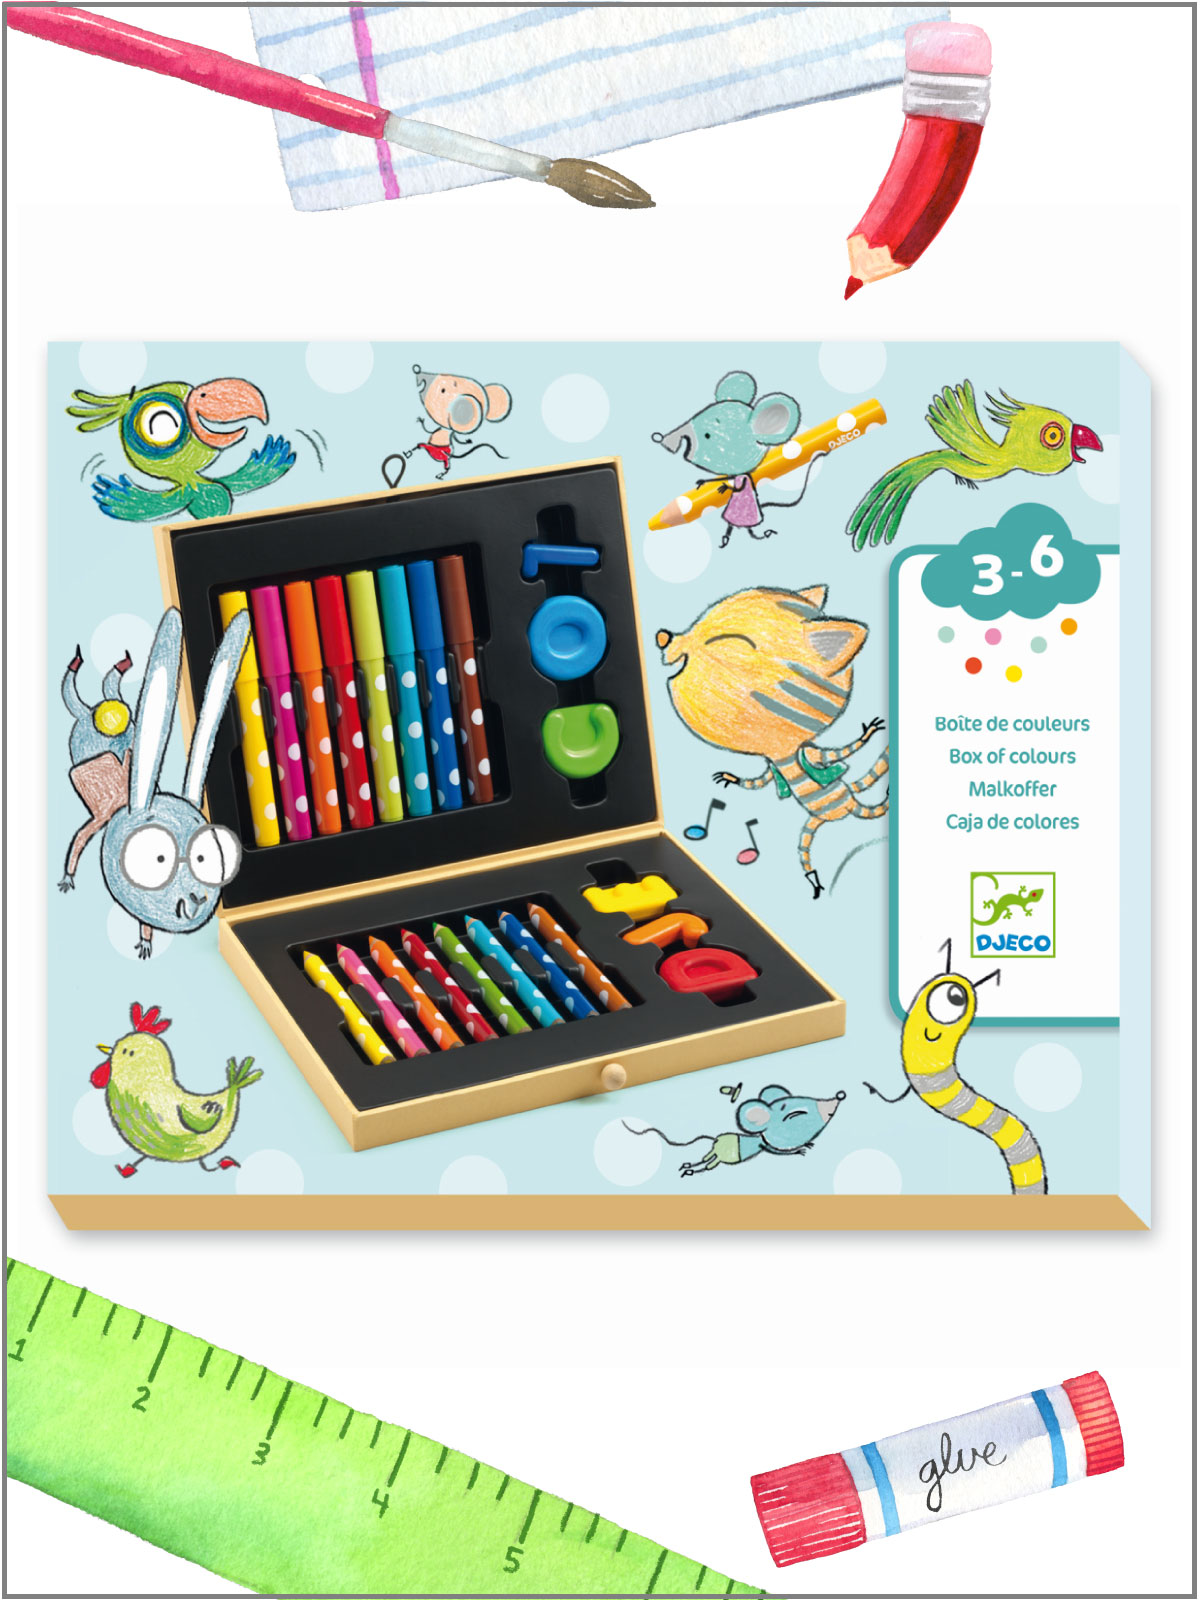 frederickandsophie-kids-toys-djeco-artist-kit-coloring-pencils-arts-crafts-play